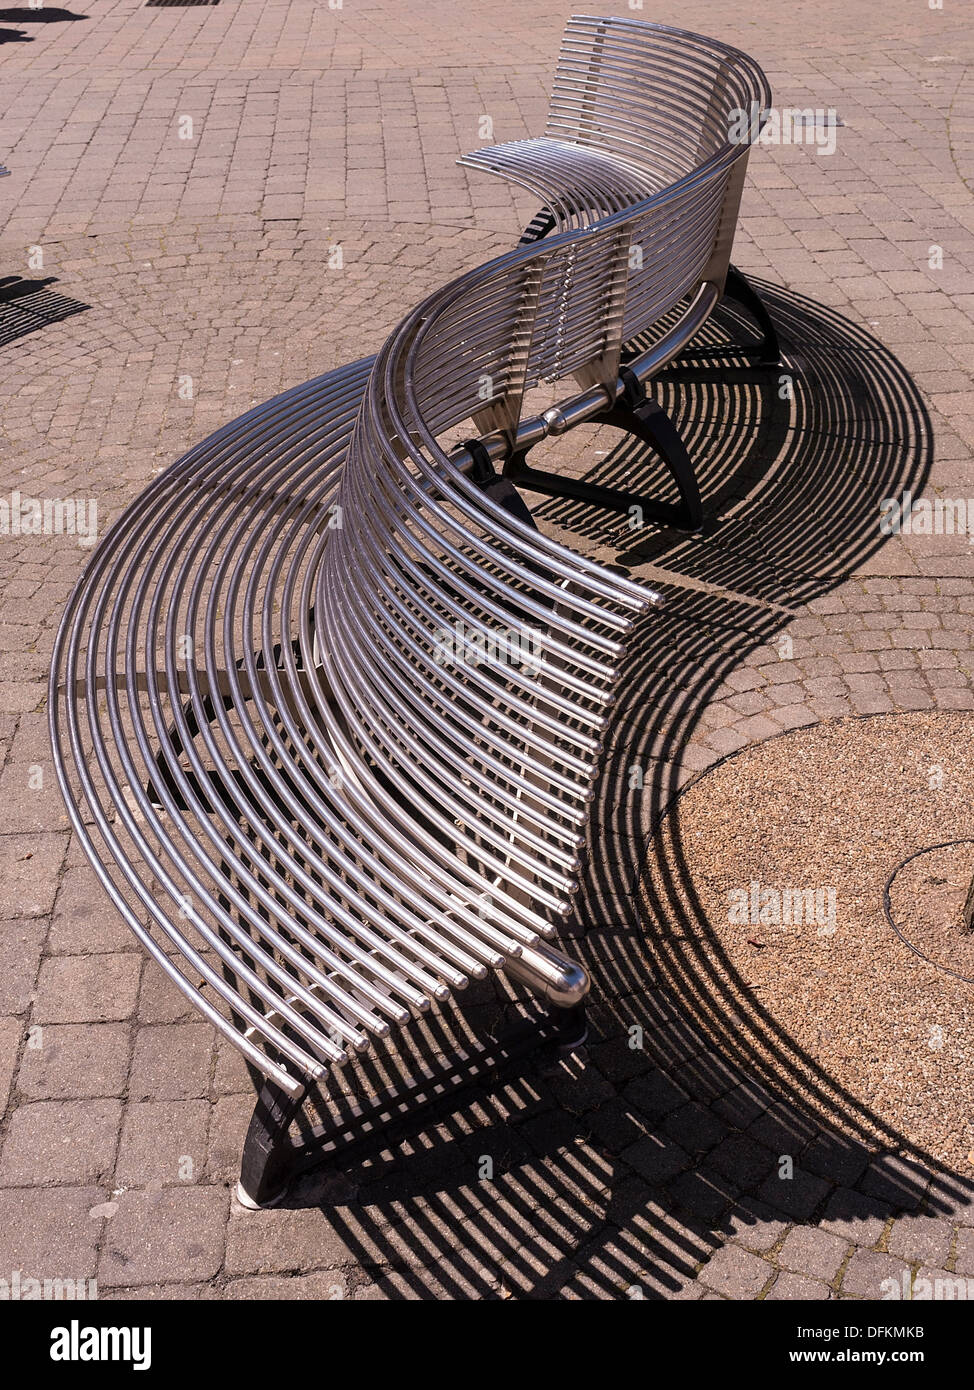 S shaped curved stainless steel metal bench seat, Loughborough, Leicestershire, England UK Stock Photo